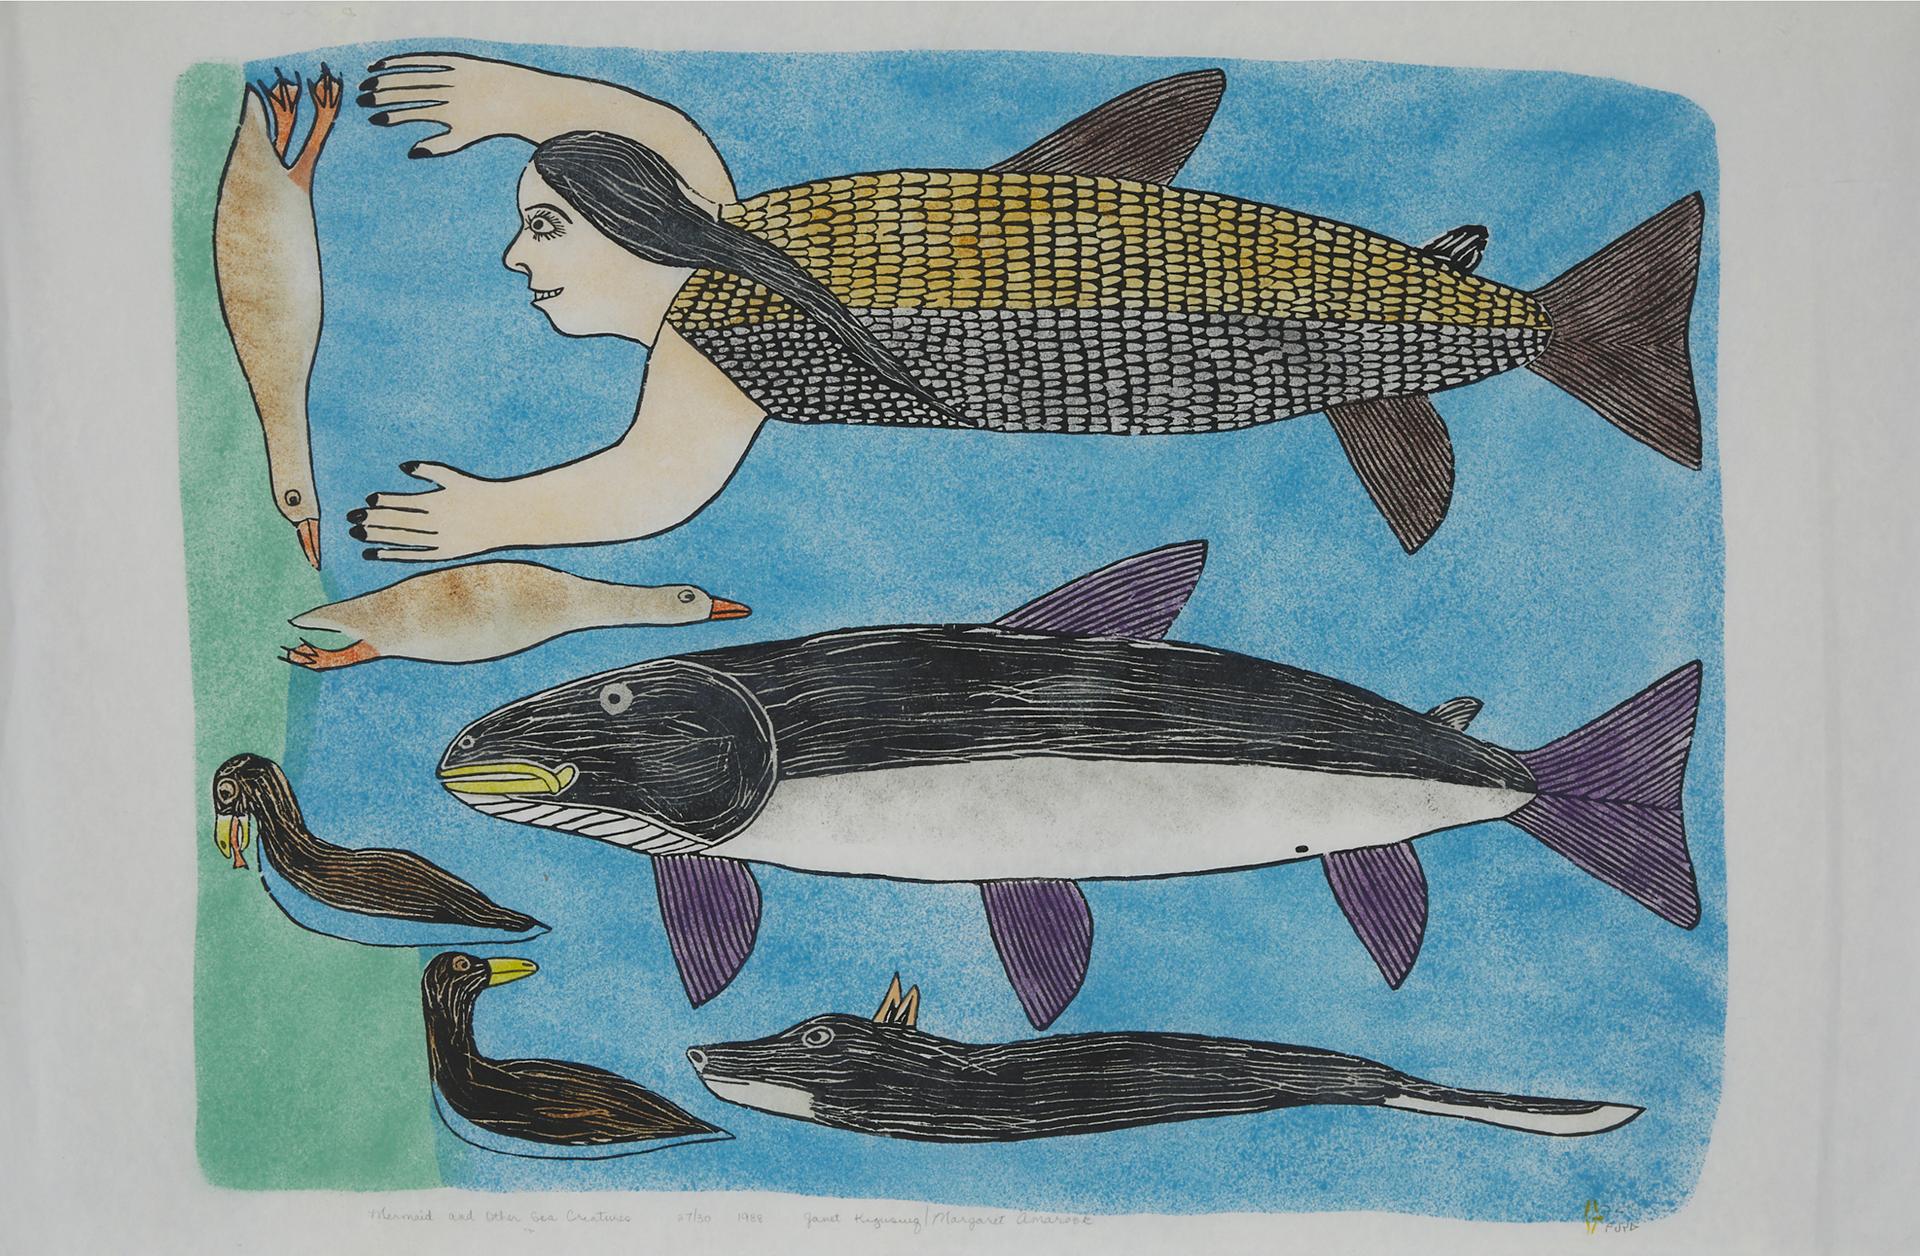 Janet Kigusiuq (1926-2005) - Mermaid And Other Sea Creatures, 1988